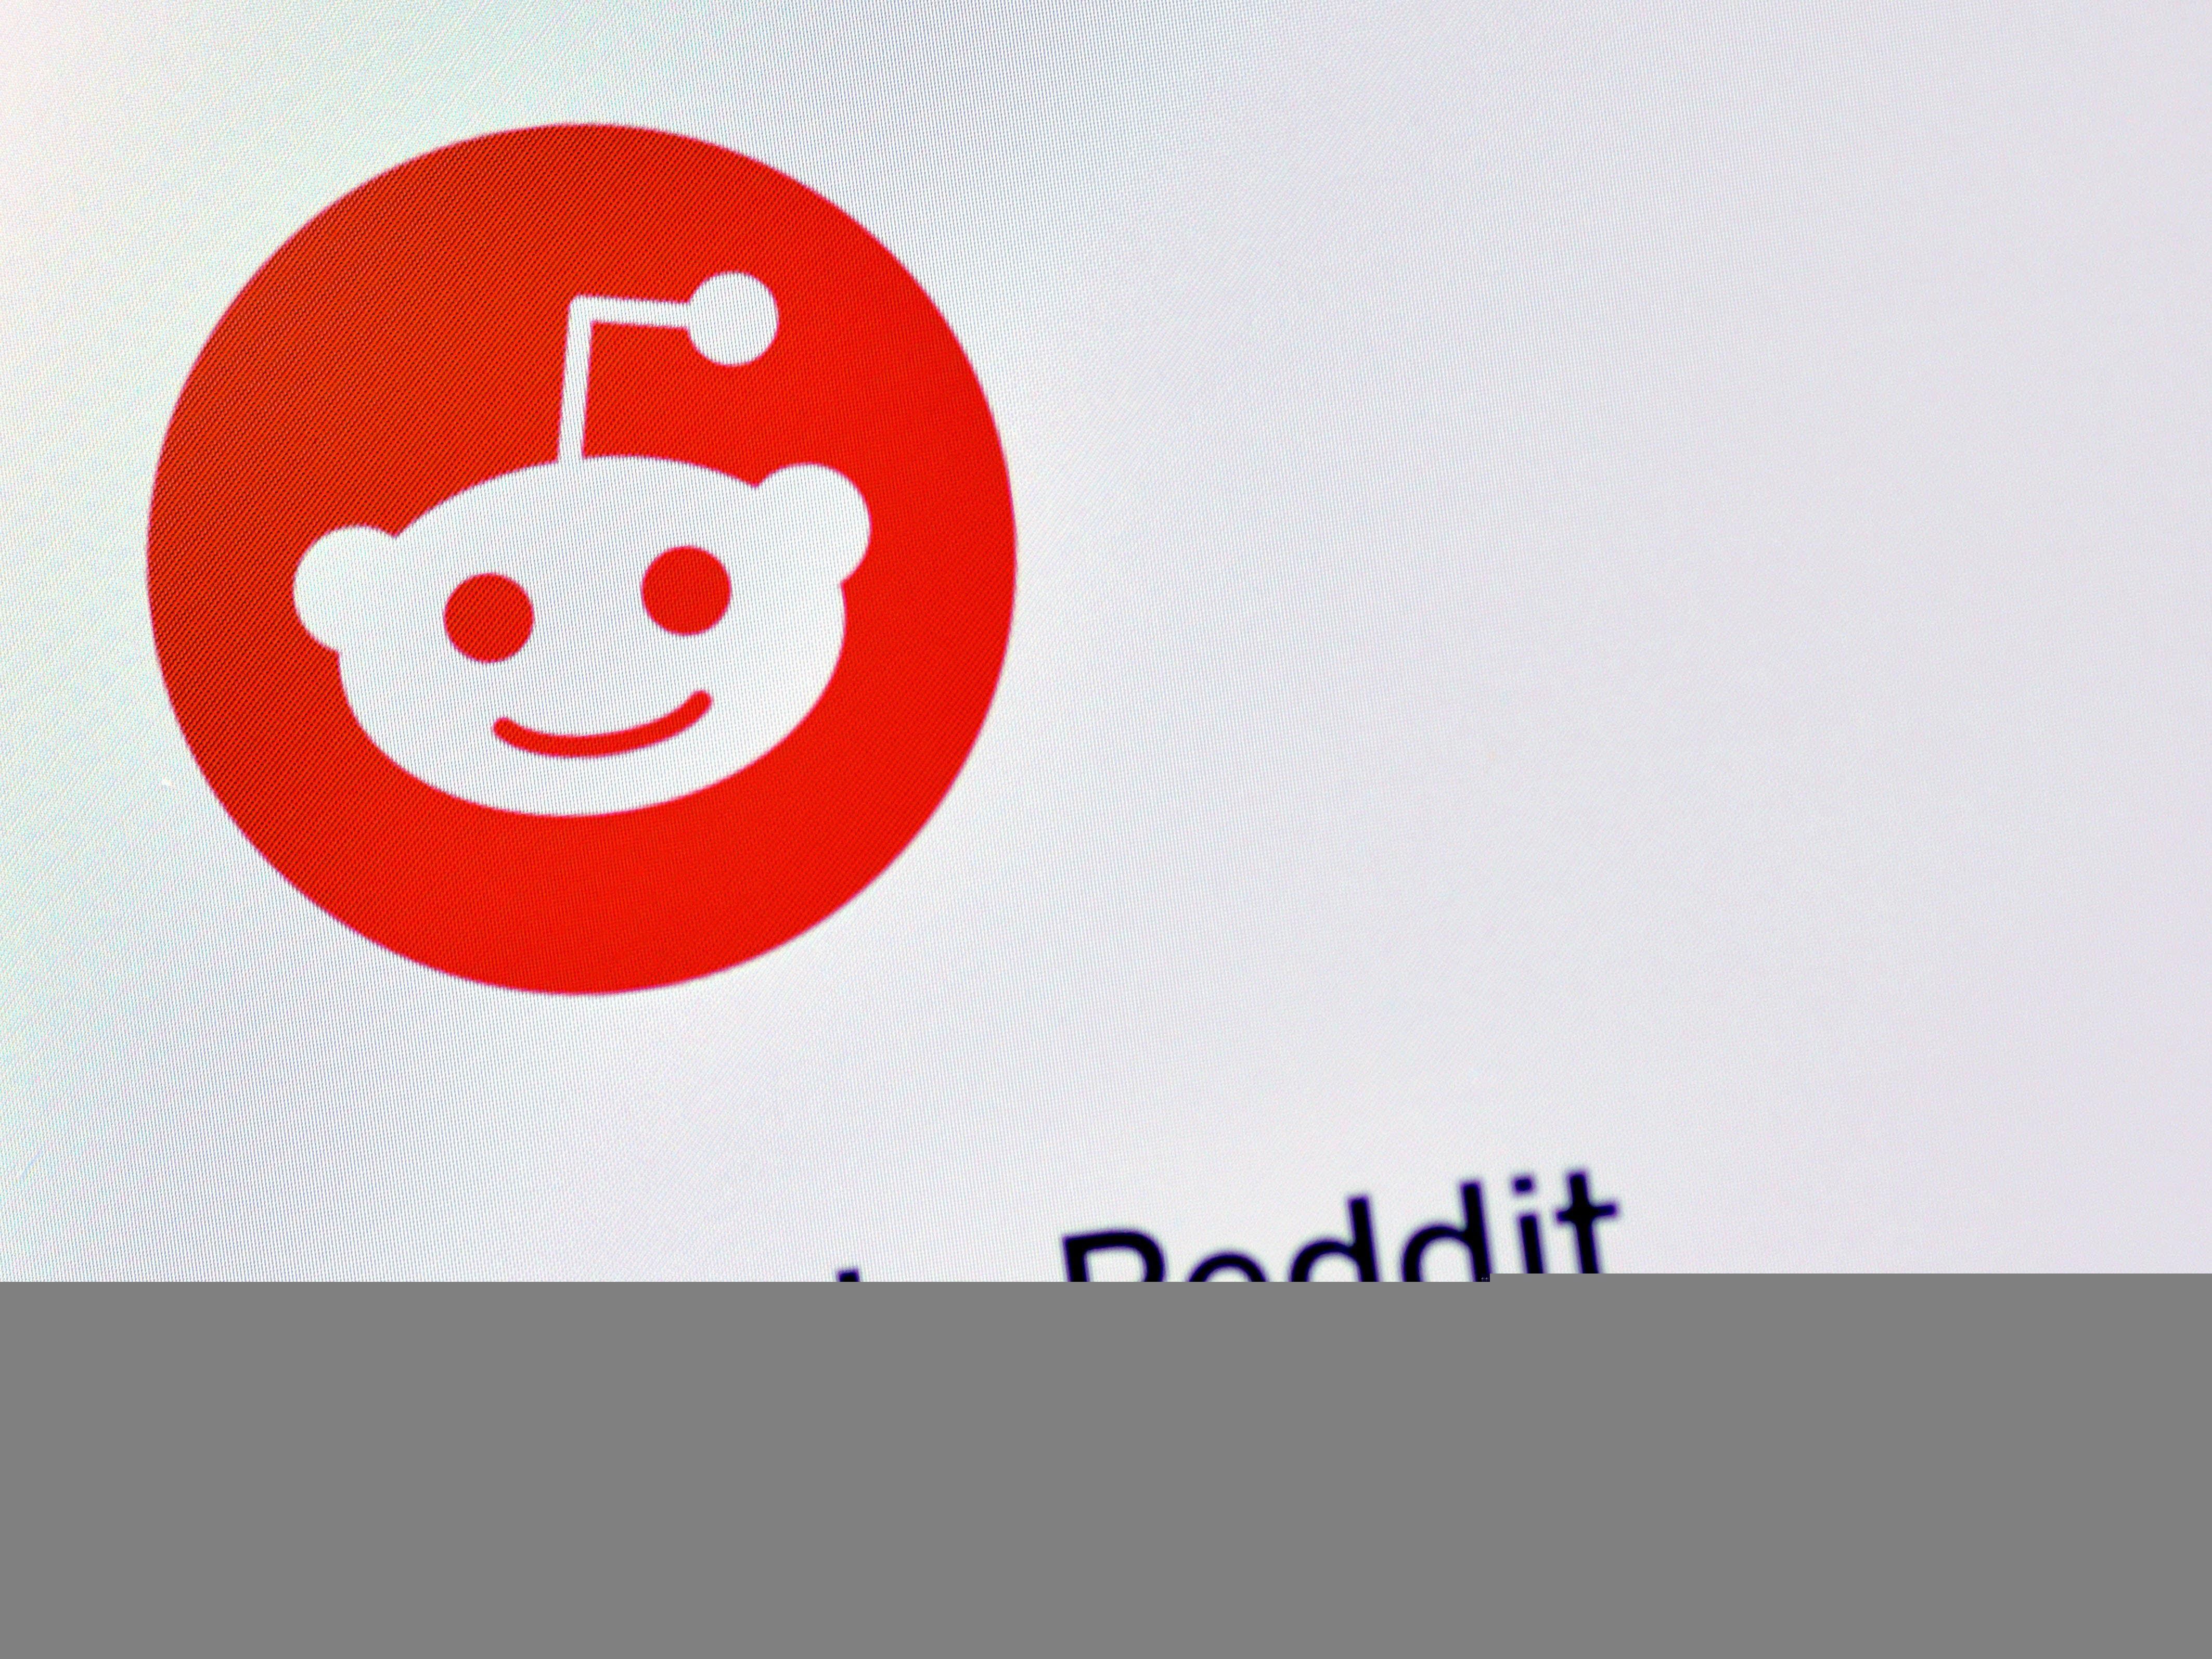 Reddit shares soar as company makes Wall Street debut